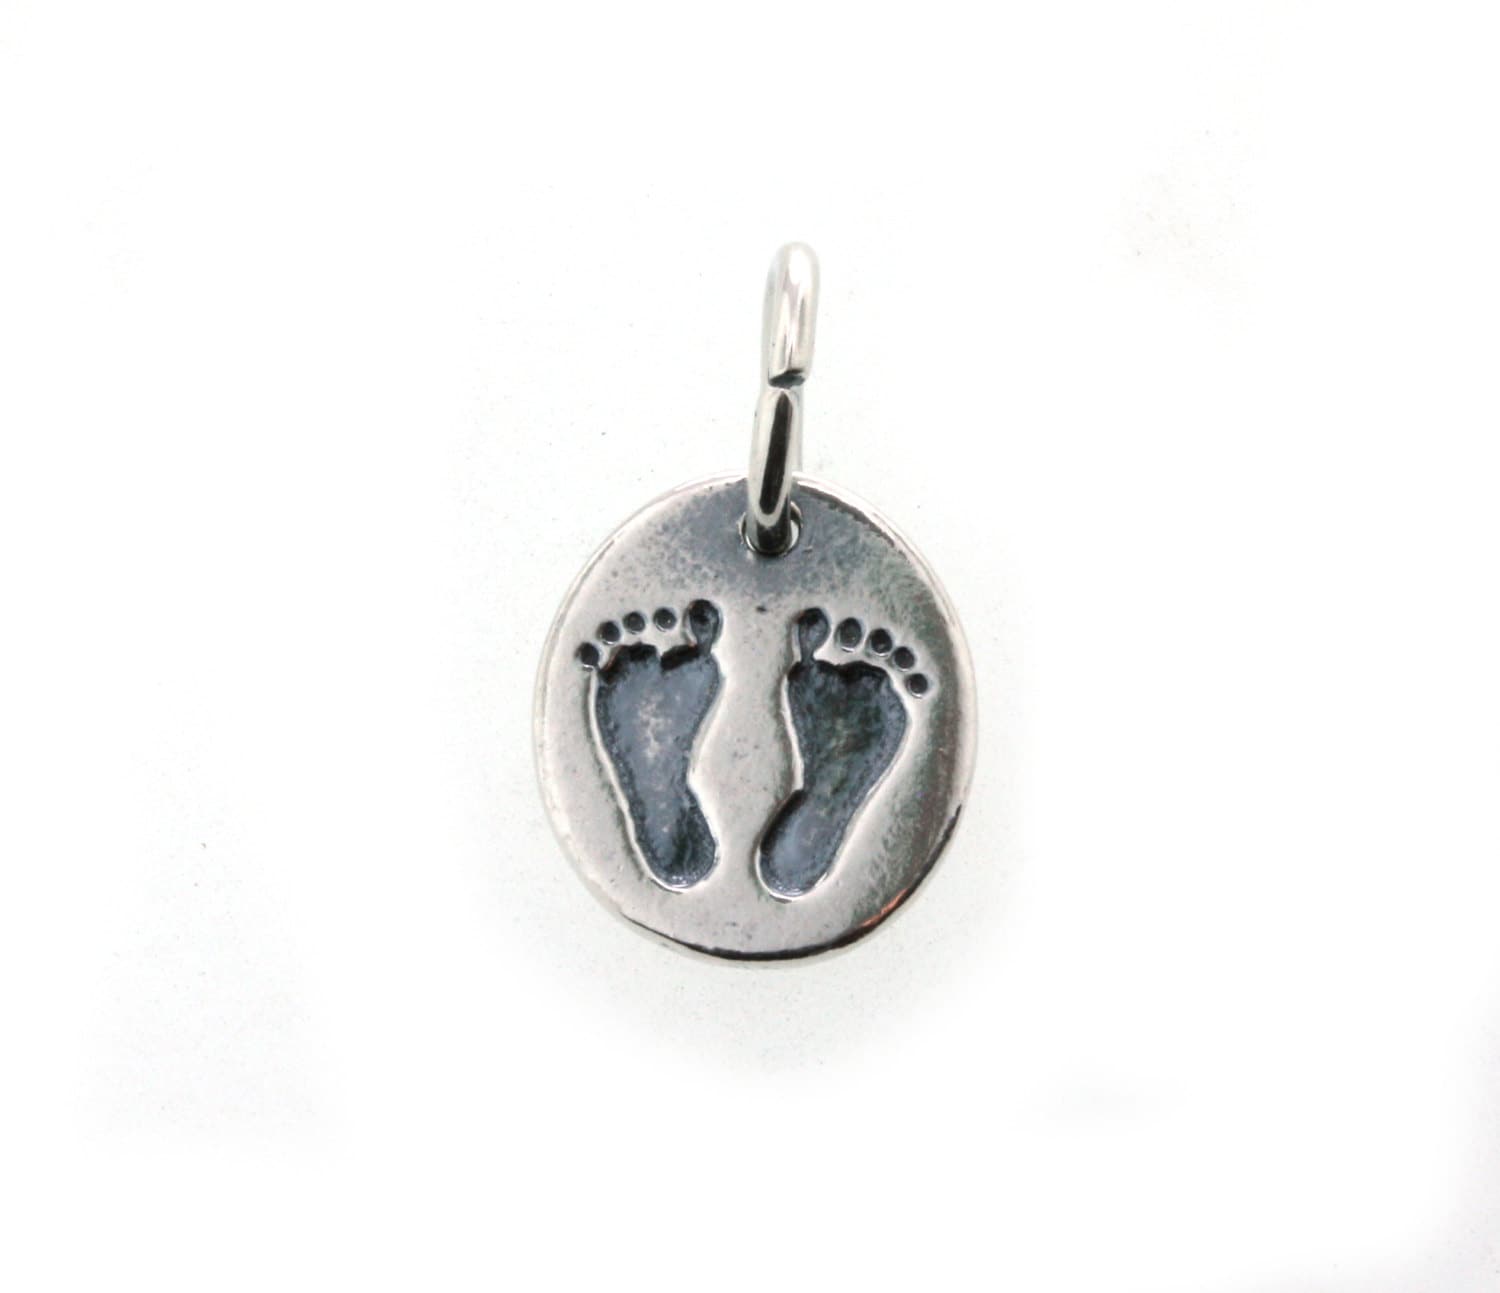 50pcs Baby Feet Charms ,jewelry Making Charms for Bracelets 